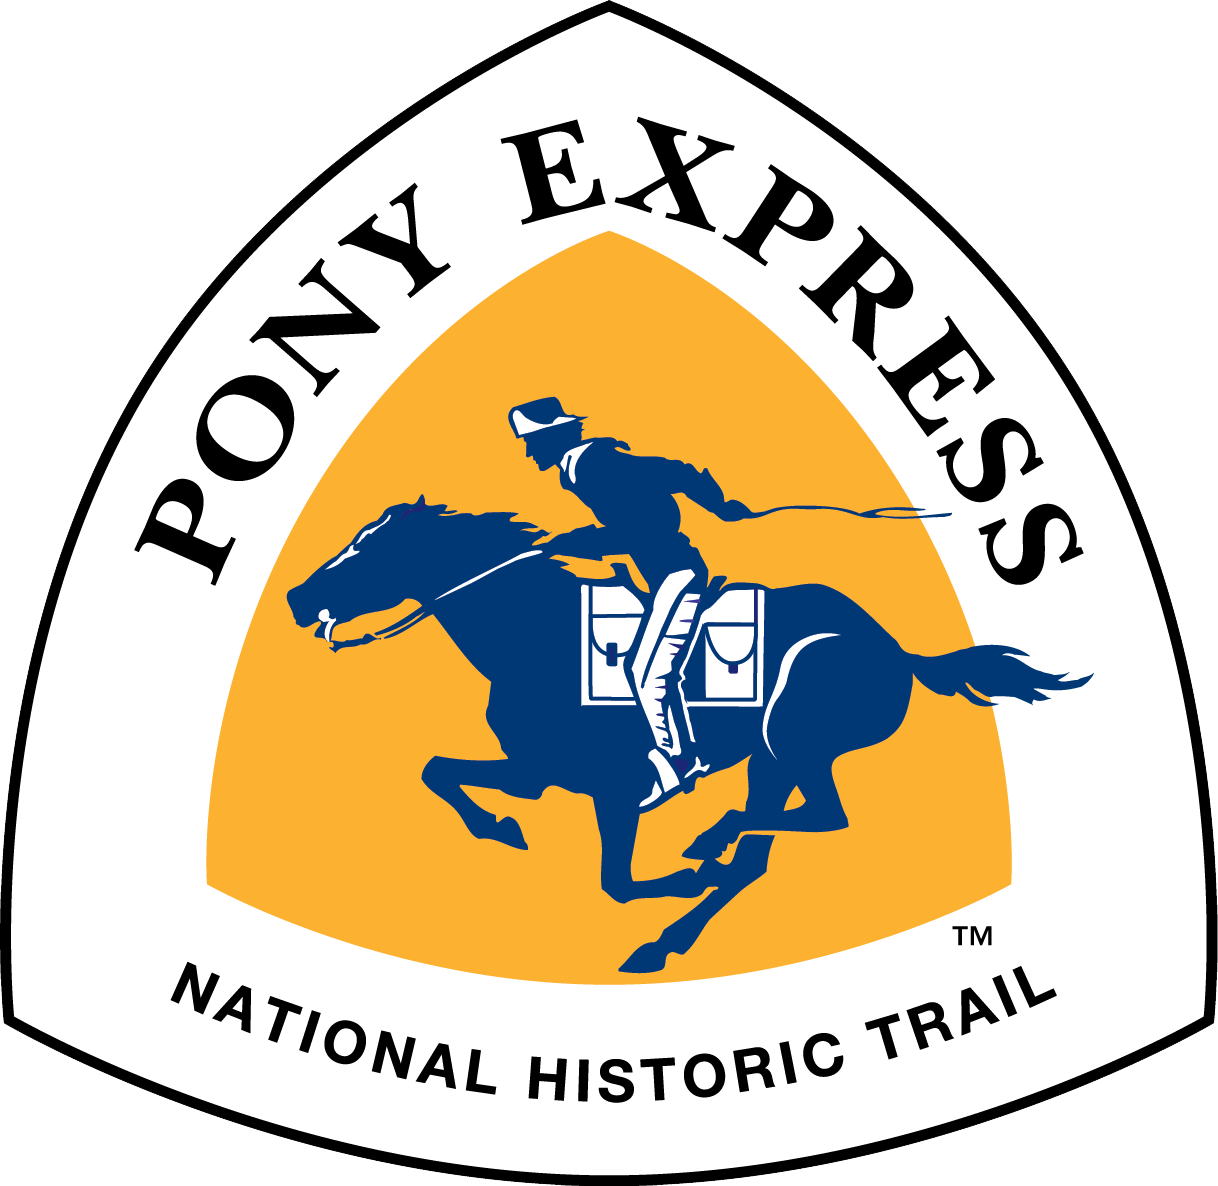 Pony Express National Historic Trail Partnership for the National